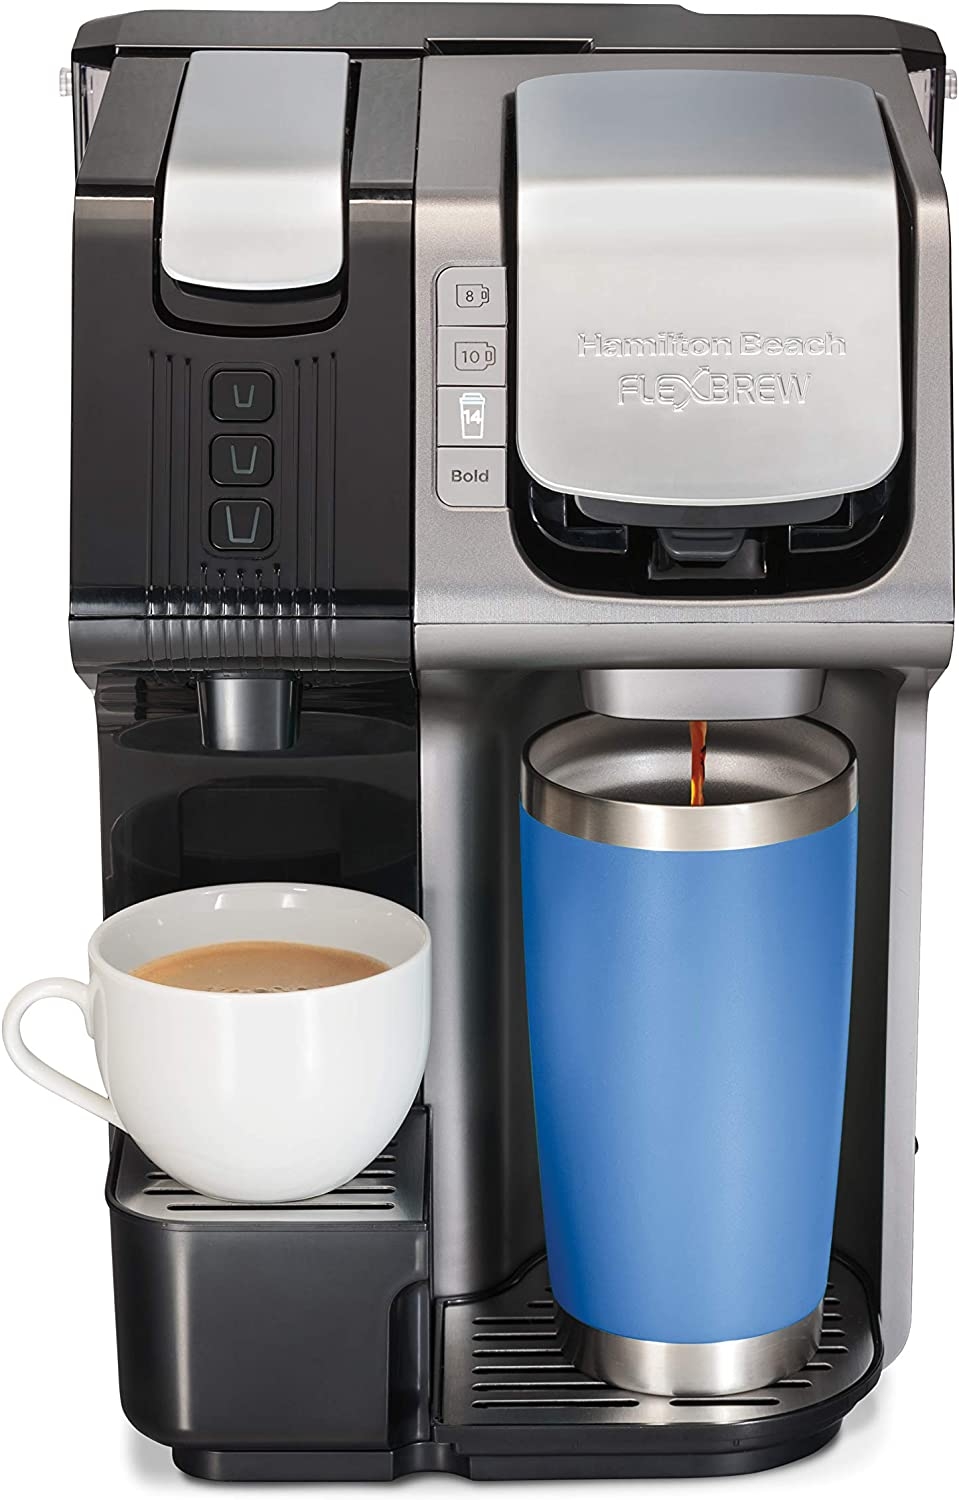 Hamilton Beach FlexBrew Trio 2-Way Coffee Maker, Compatible with K-Cup Pods or Grounds, Combo, Single Serve & Full 12c Pot,